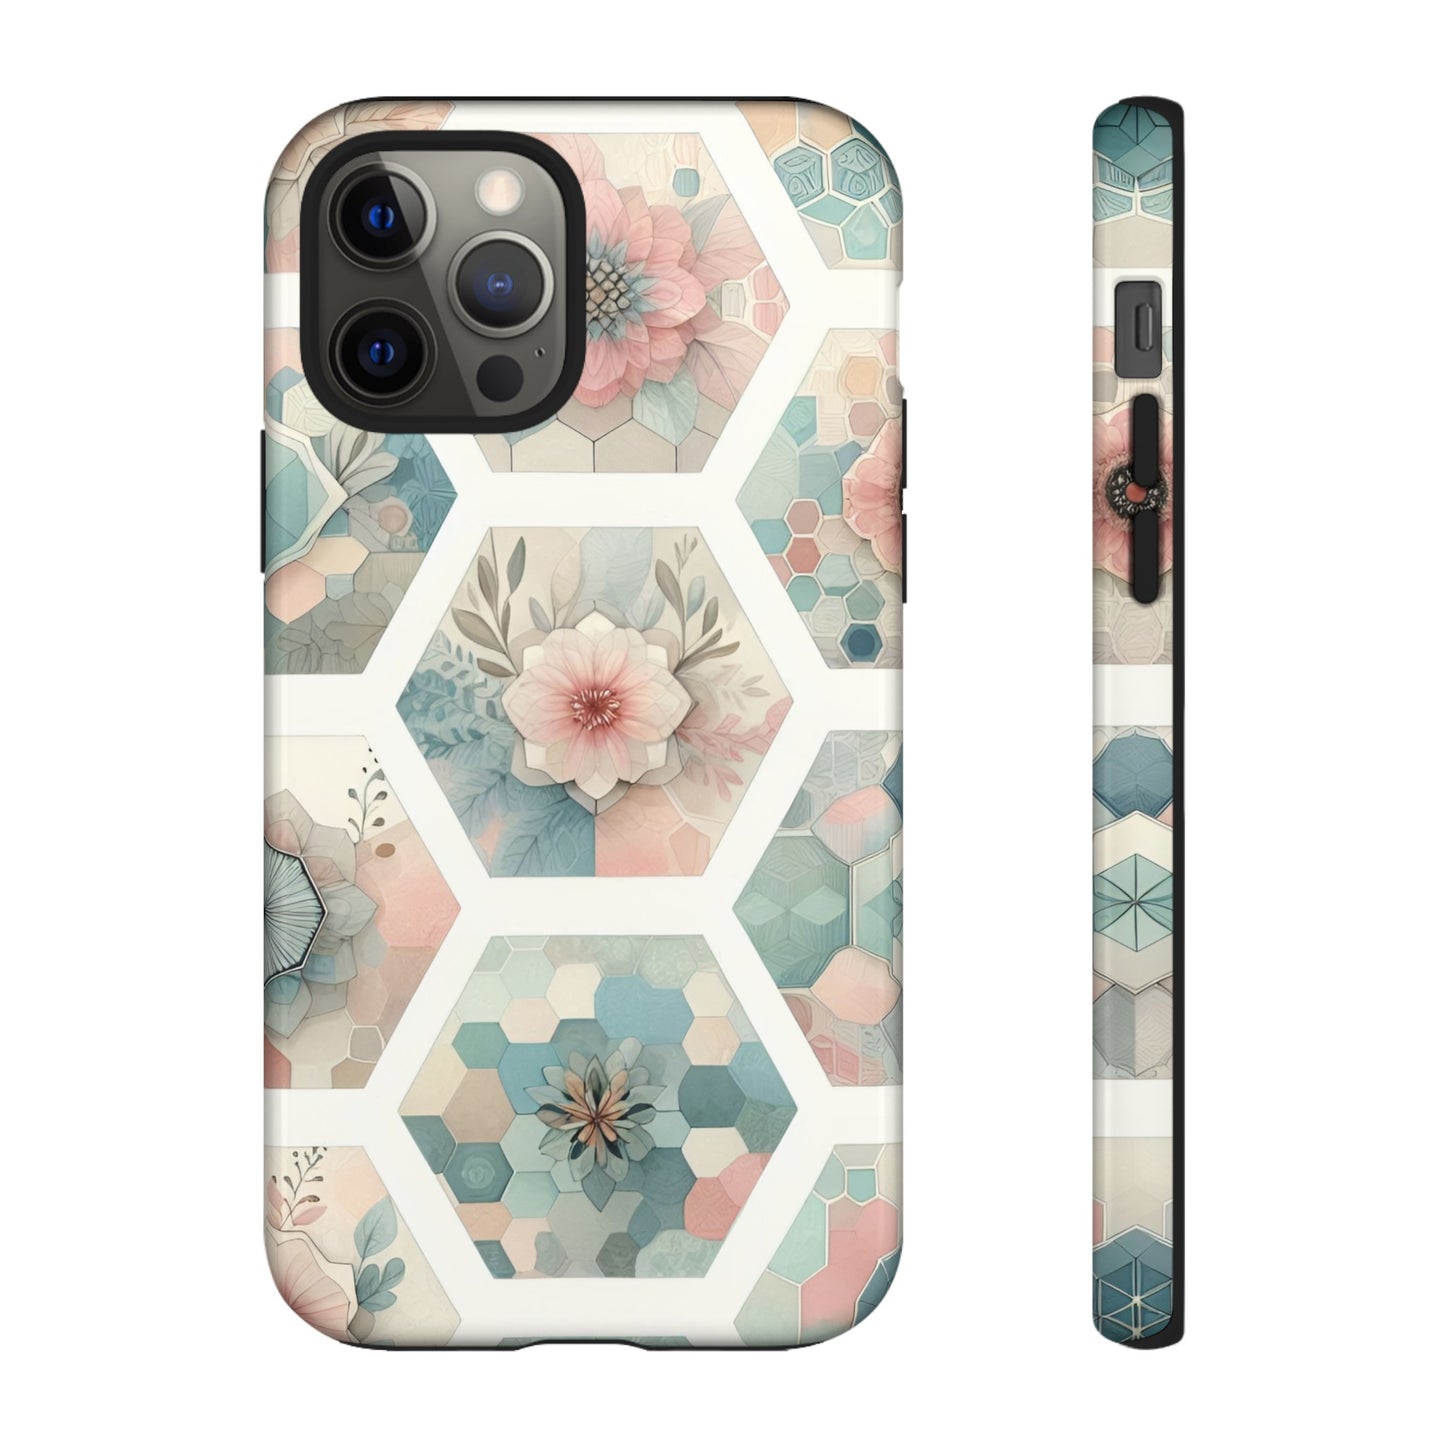 Hexagon Shape With Floral Center IPhone 11-15 Cases